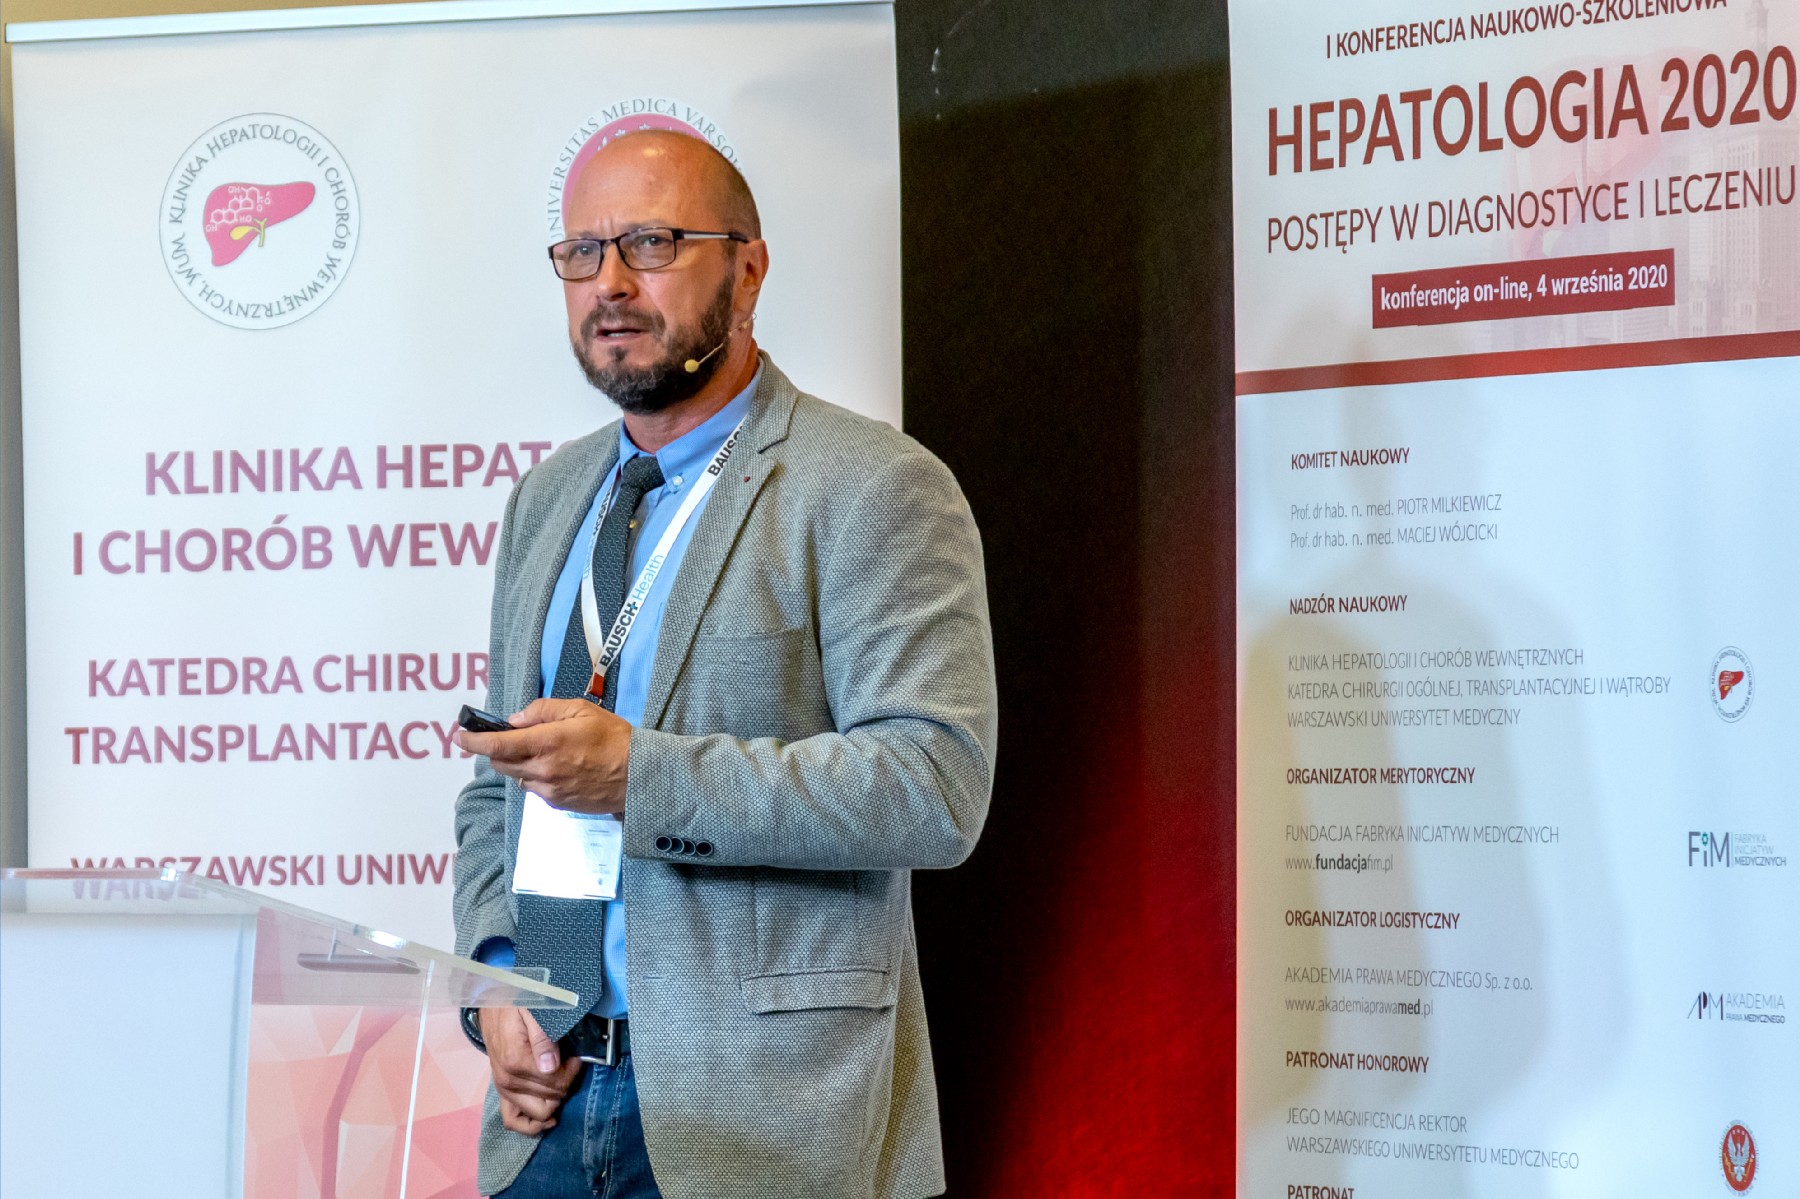 "Hepatology 2020 - Progress in diagnostics and treatment" Conference